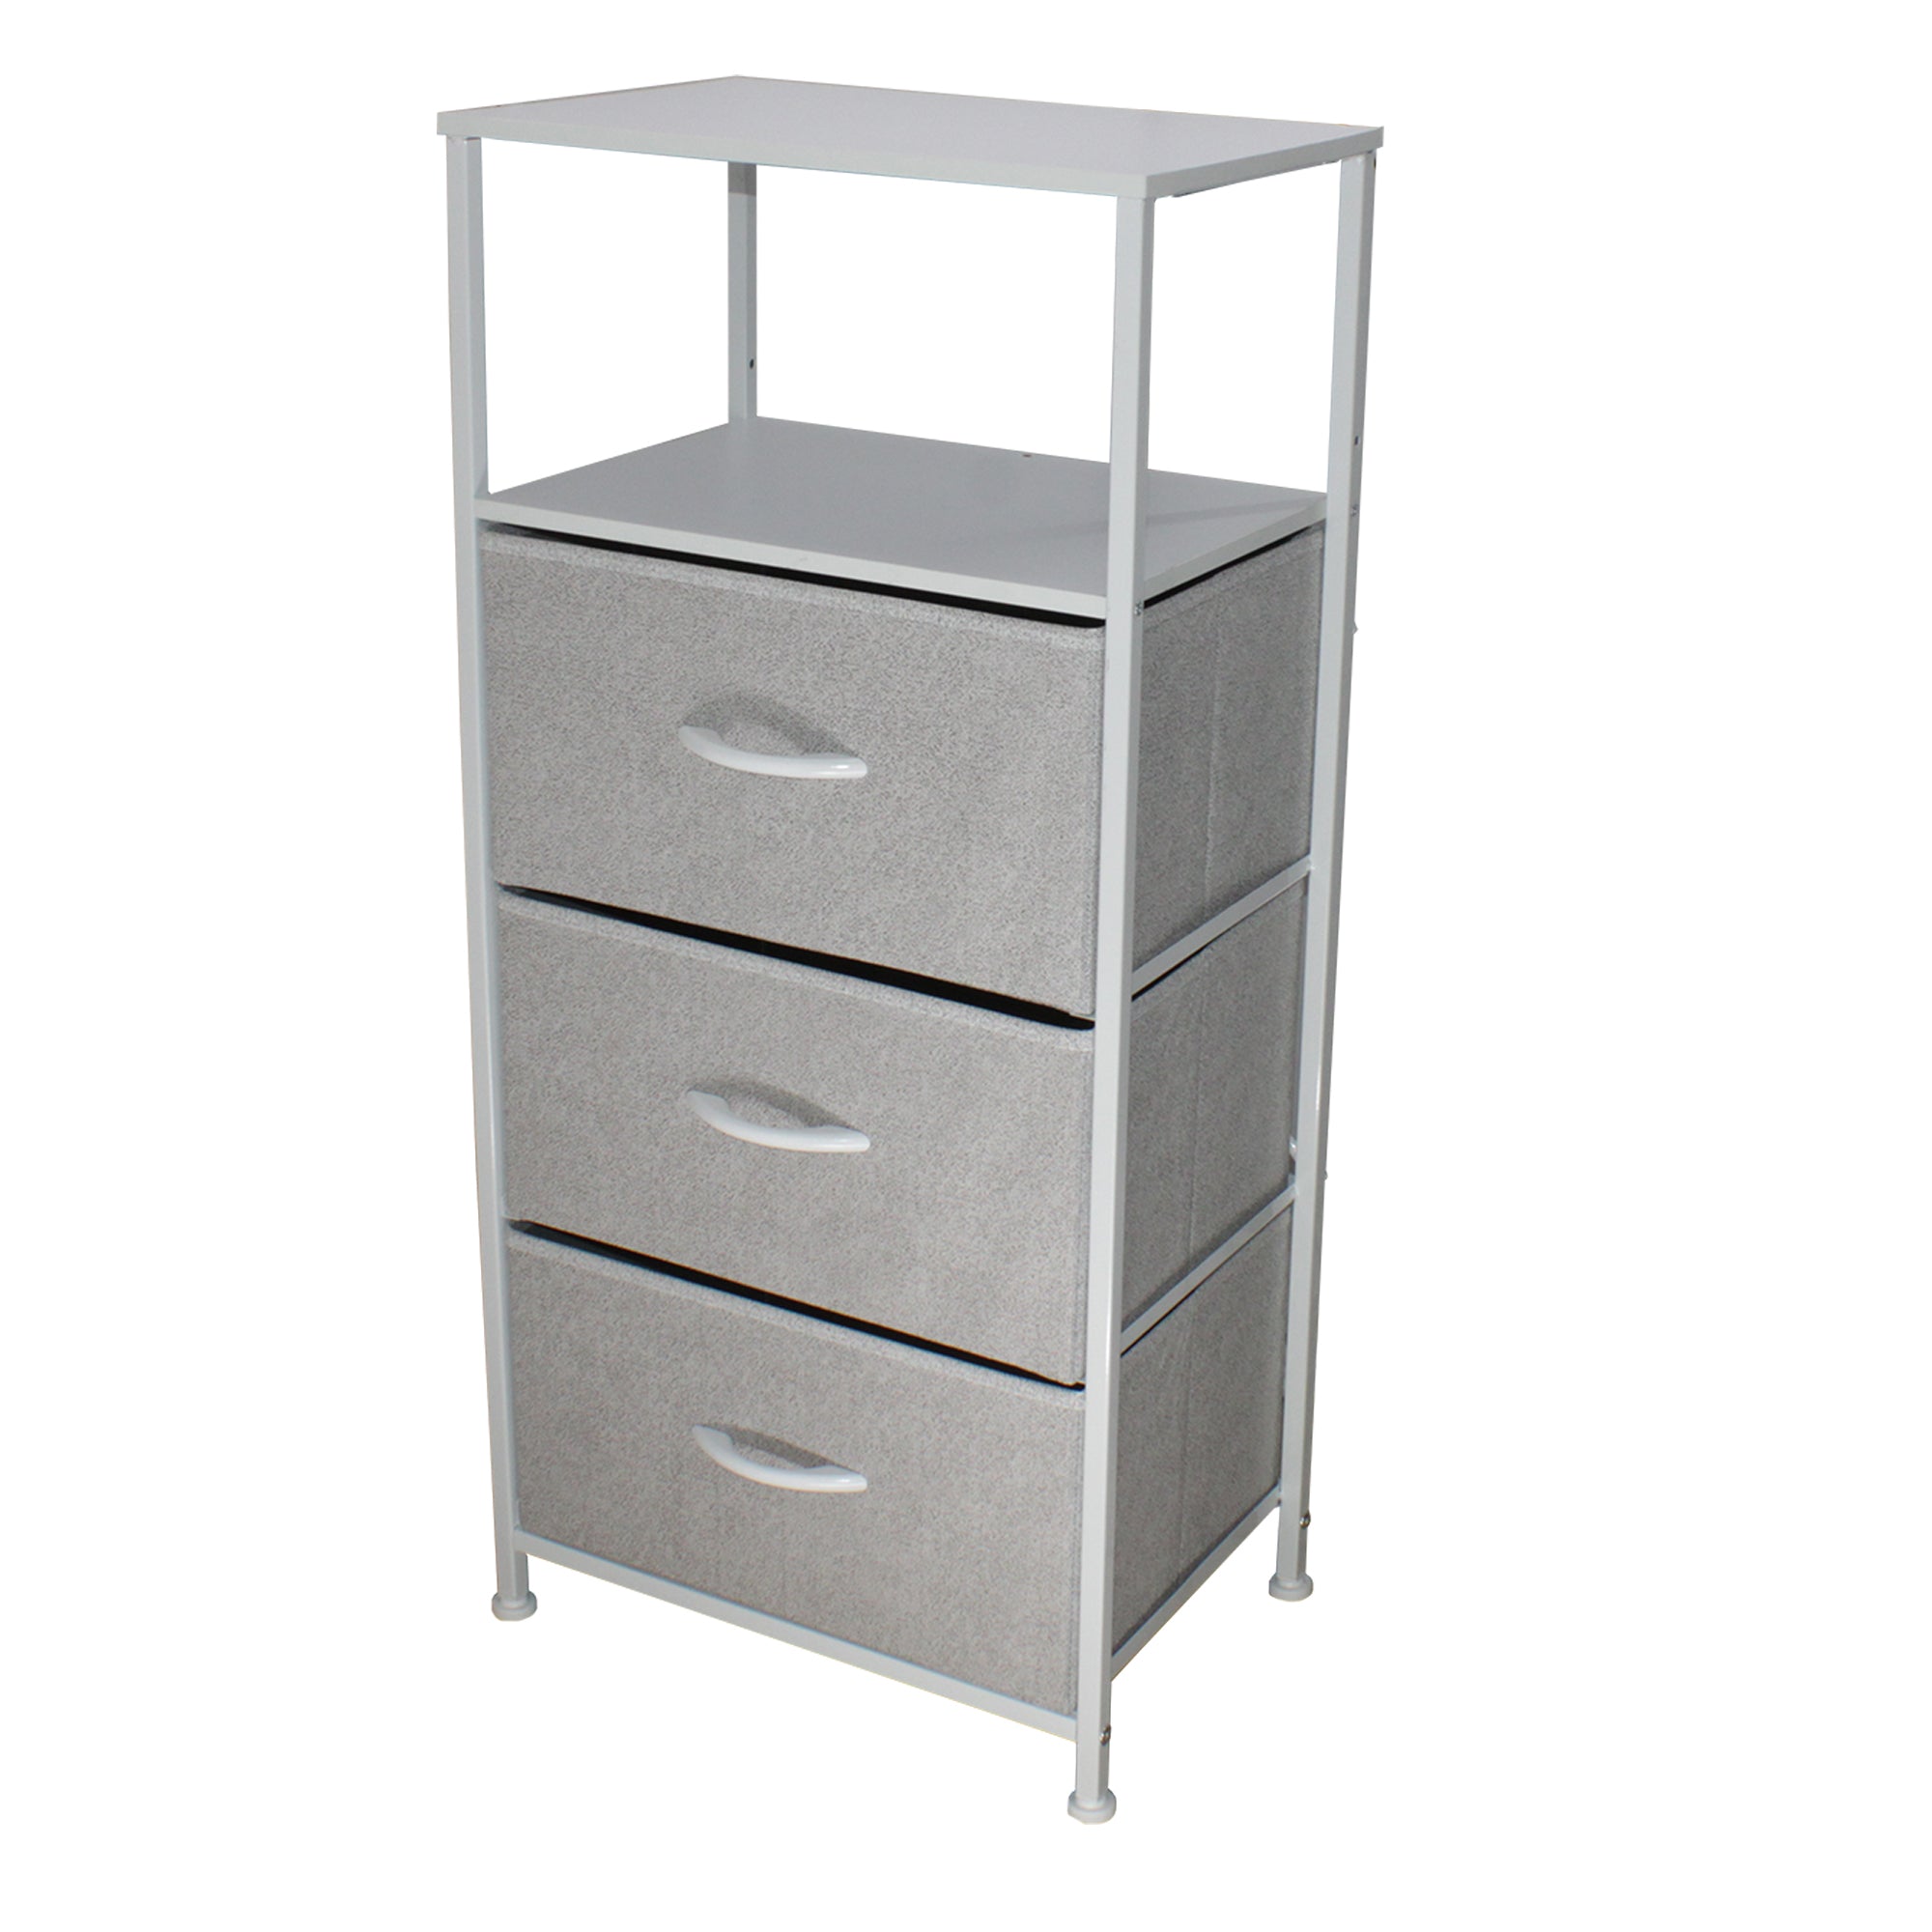 LMA Branded Economical Metal Frame & Fabric - 3 Drawer Cabinet WHT/GRY